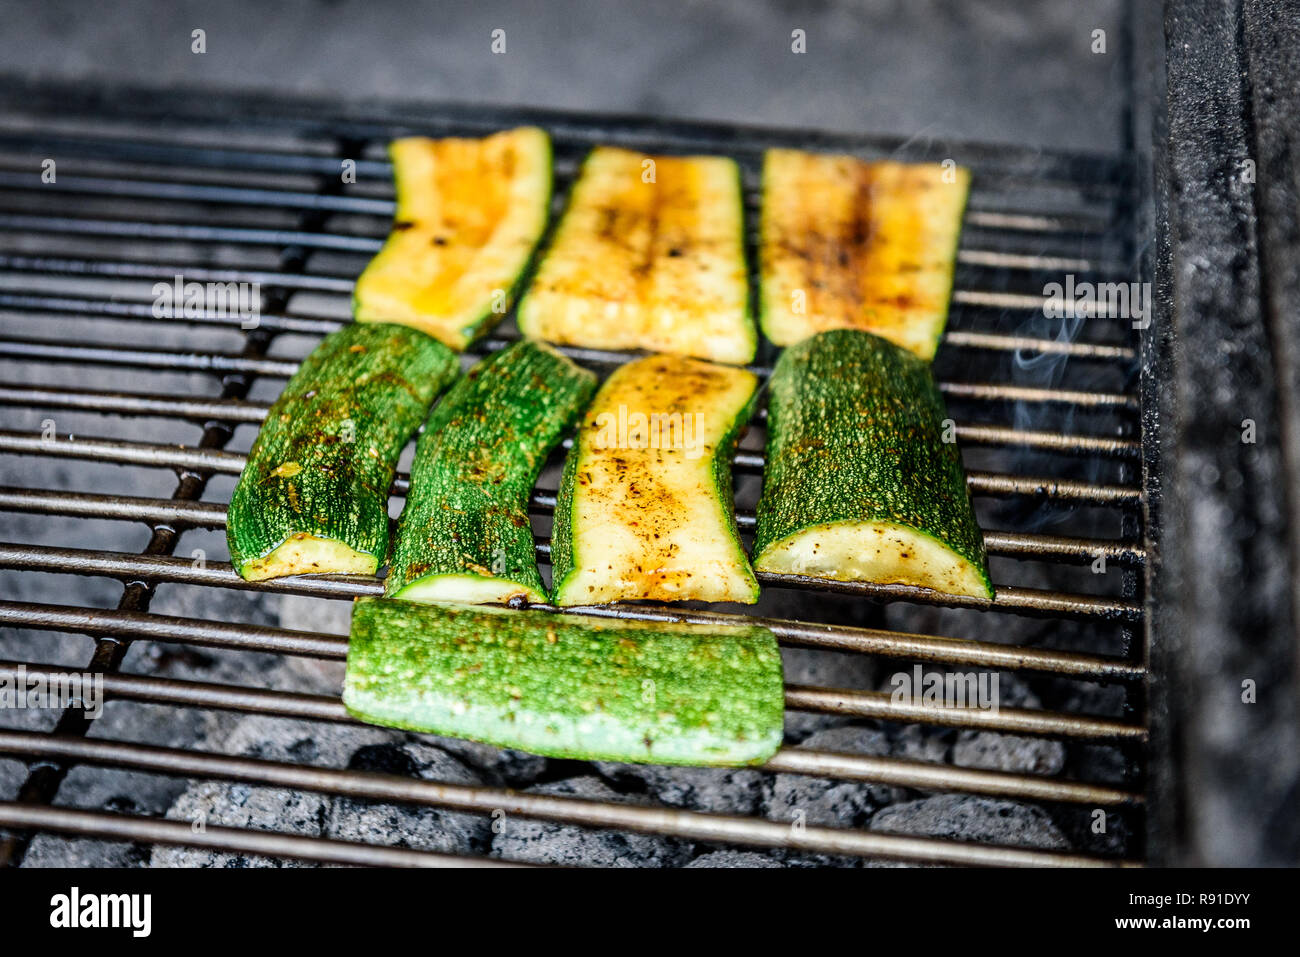 Grilling zucchini or courgette on a coal barbecue grill. Traditional Mediterranean healthy dish in prepared in barbecue fireplace. Stock Photo